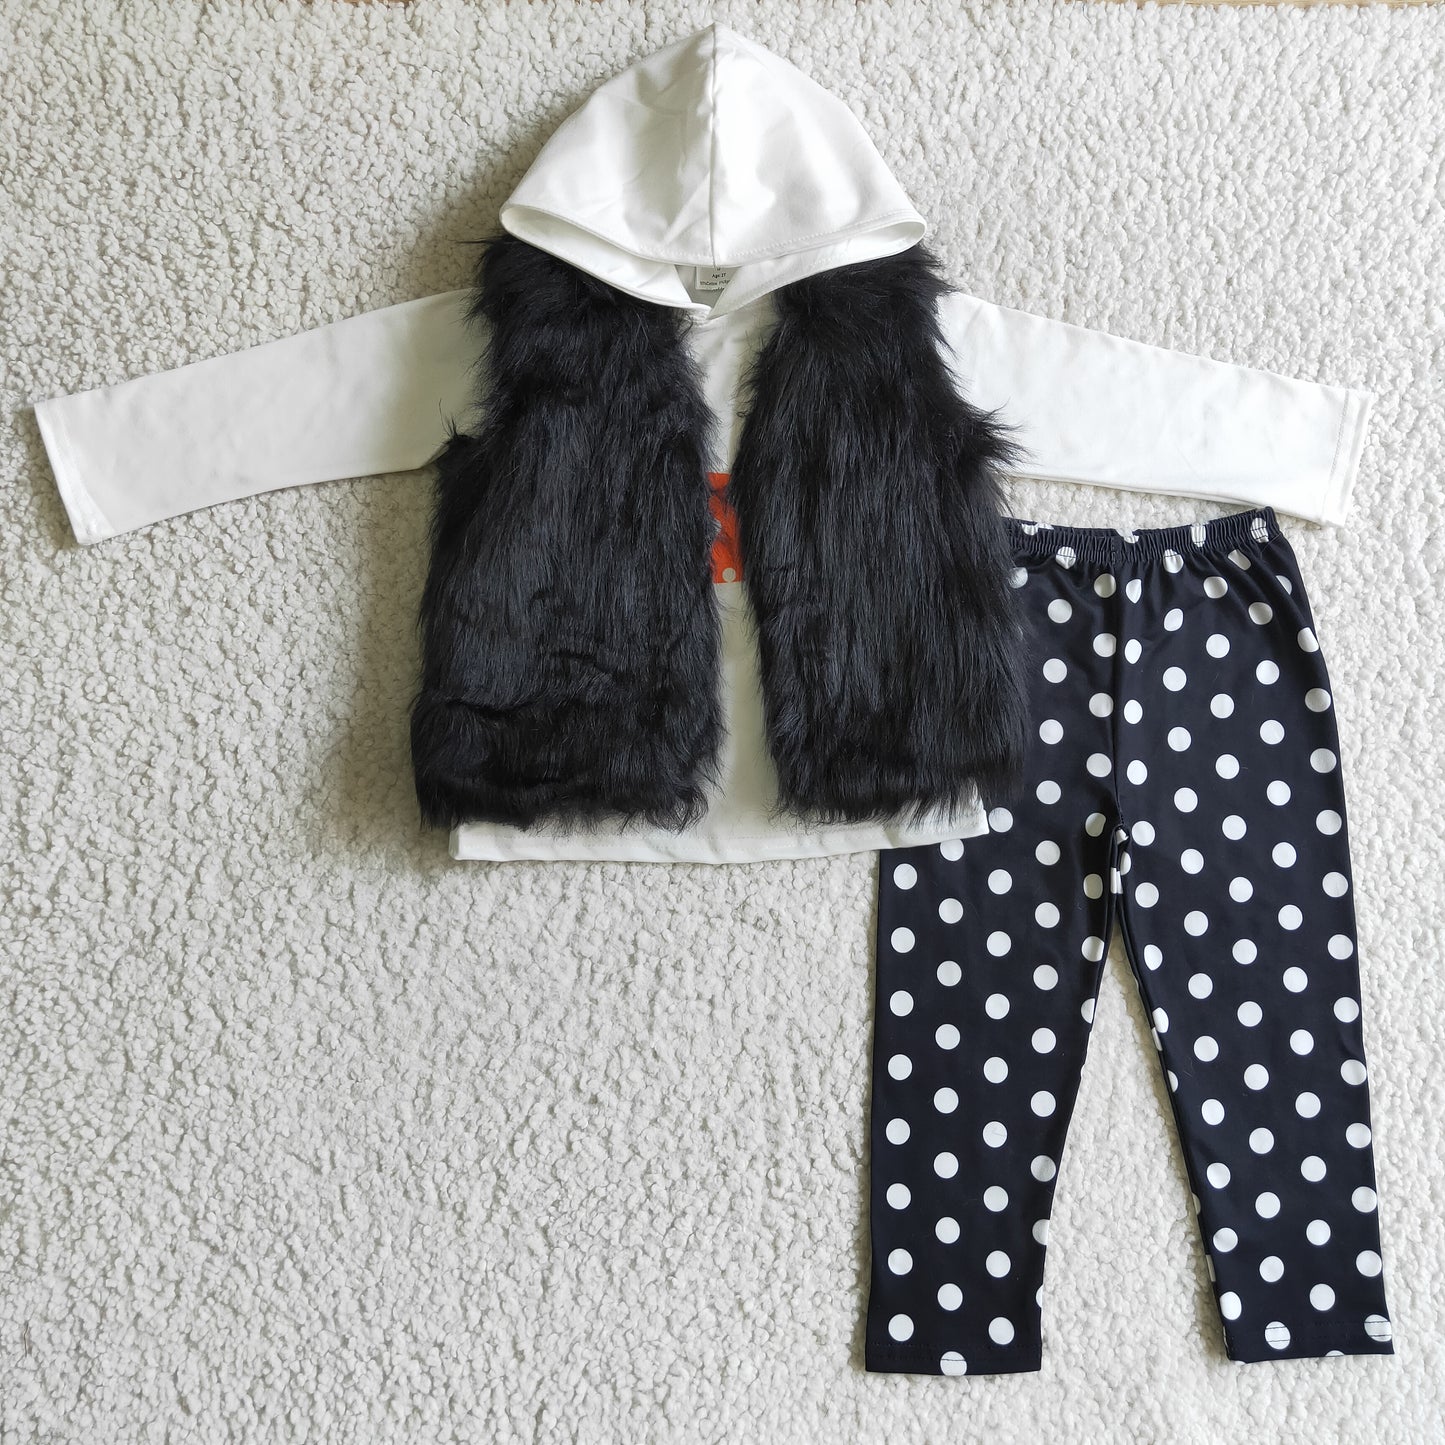 let it snow white hoodie sweater black dots legging outfit